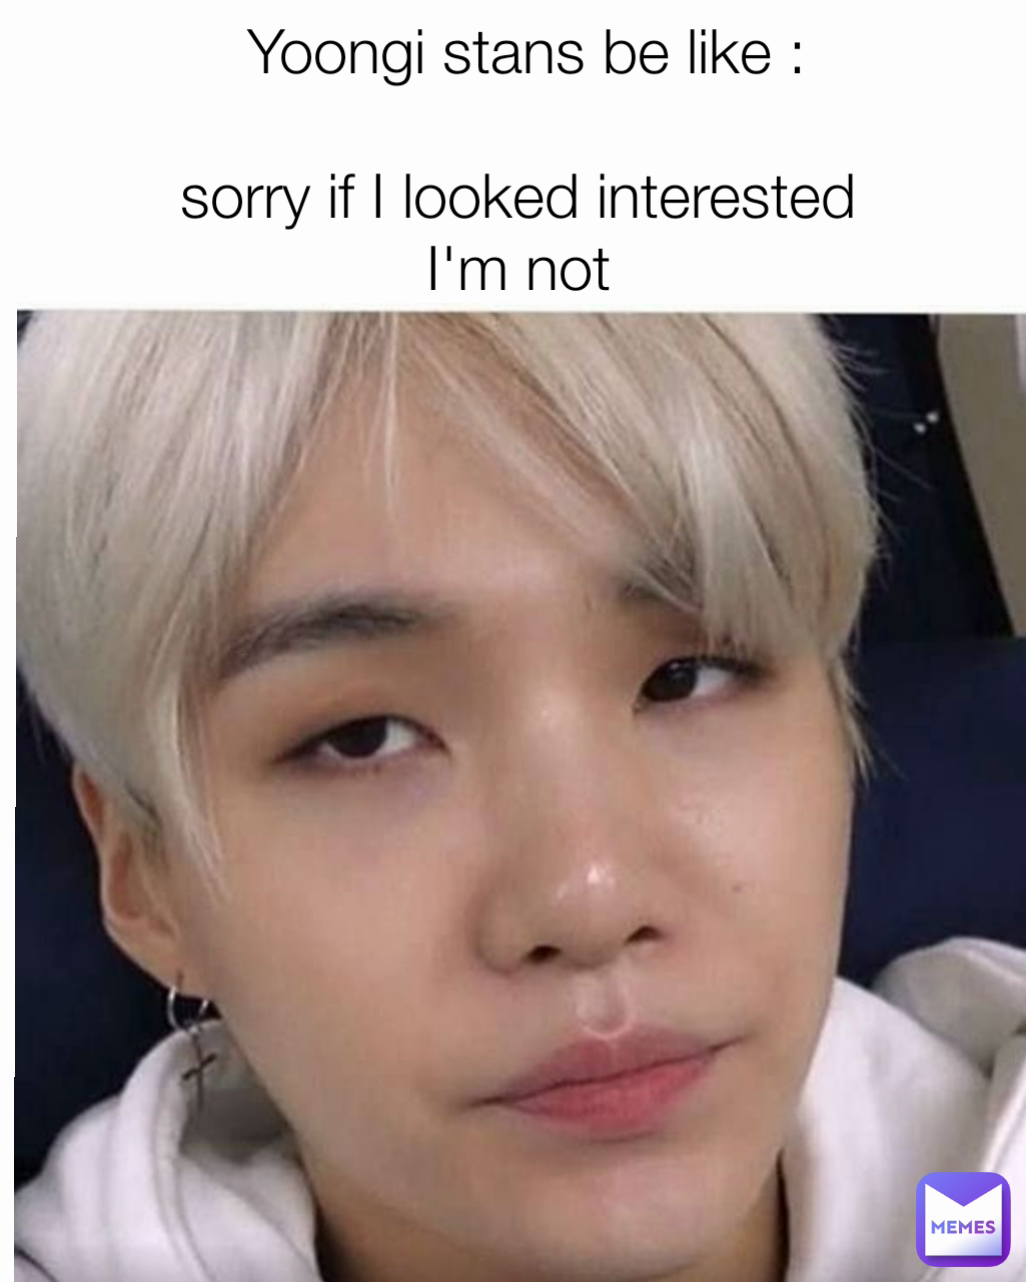 Yoongi stans be like :

sorry if I looked interested 
I'm not 